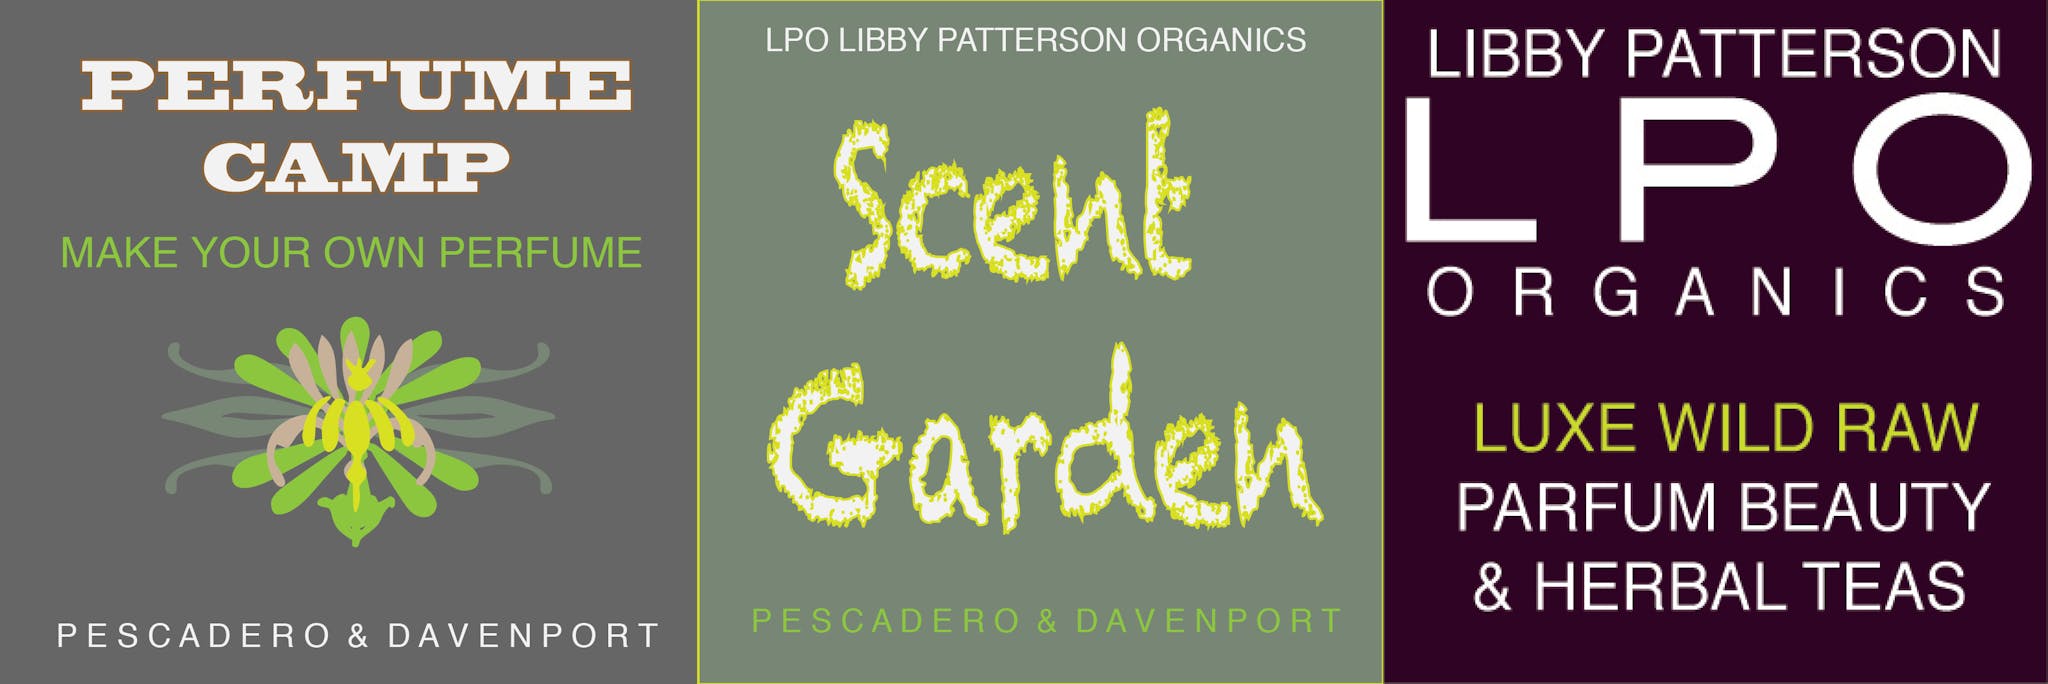 Libby Patterson Organics's banner